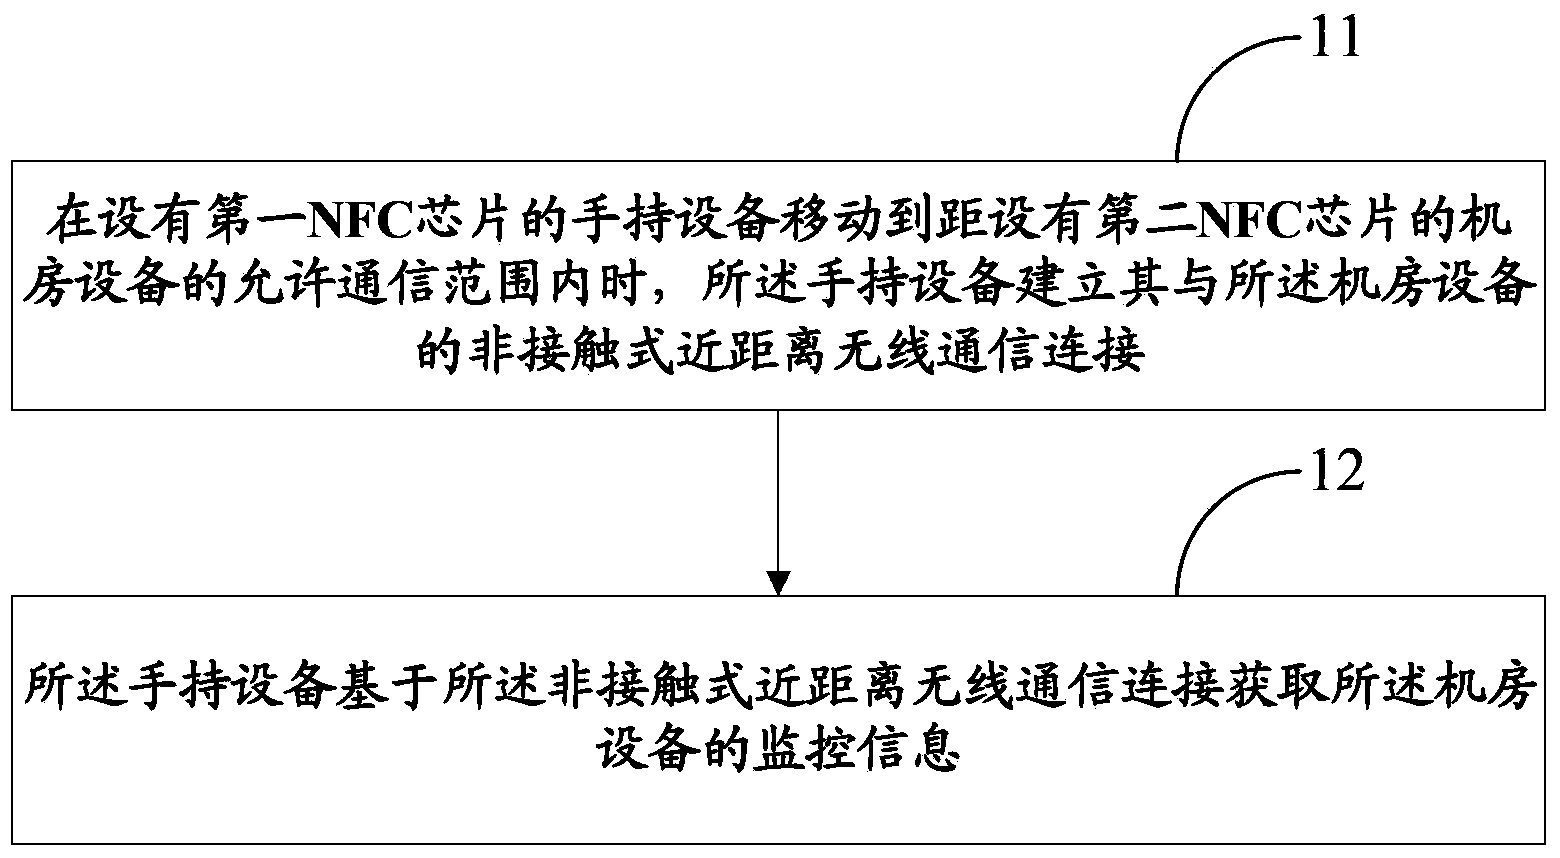 Computer room wireless monitoring method and system, handheld device and computer room device